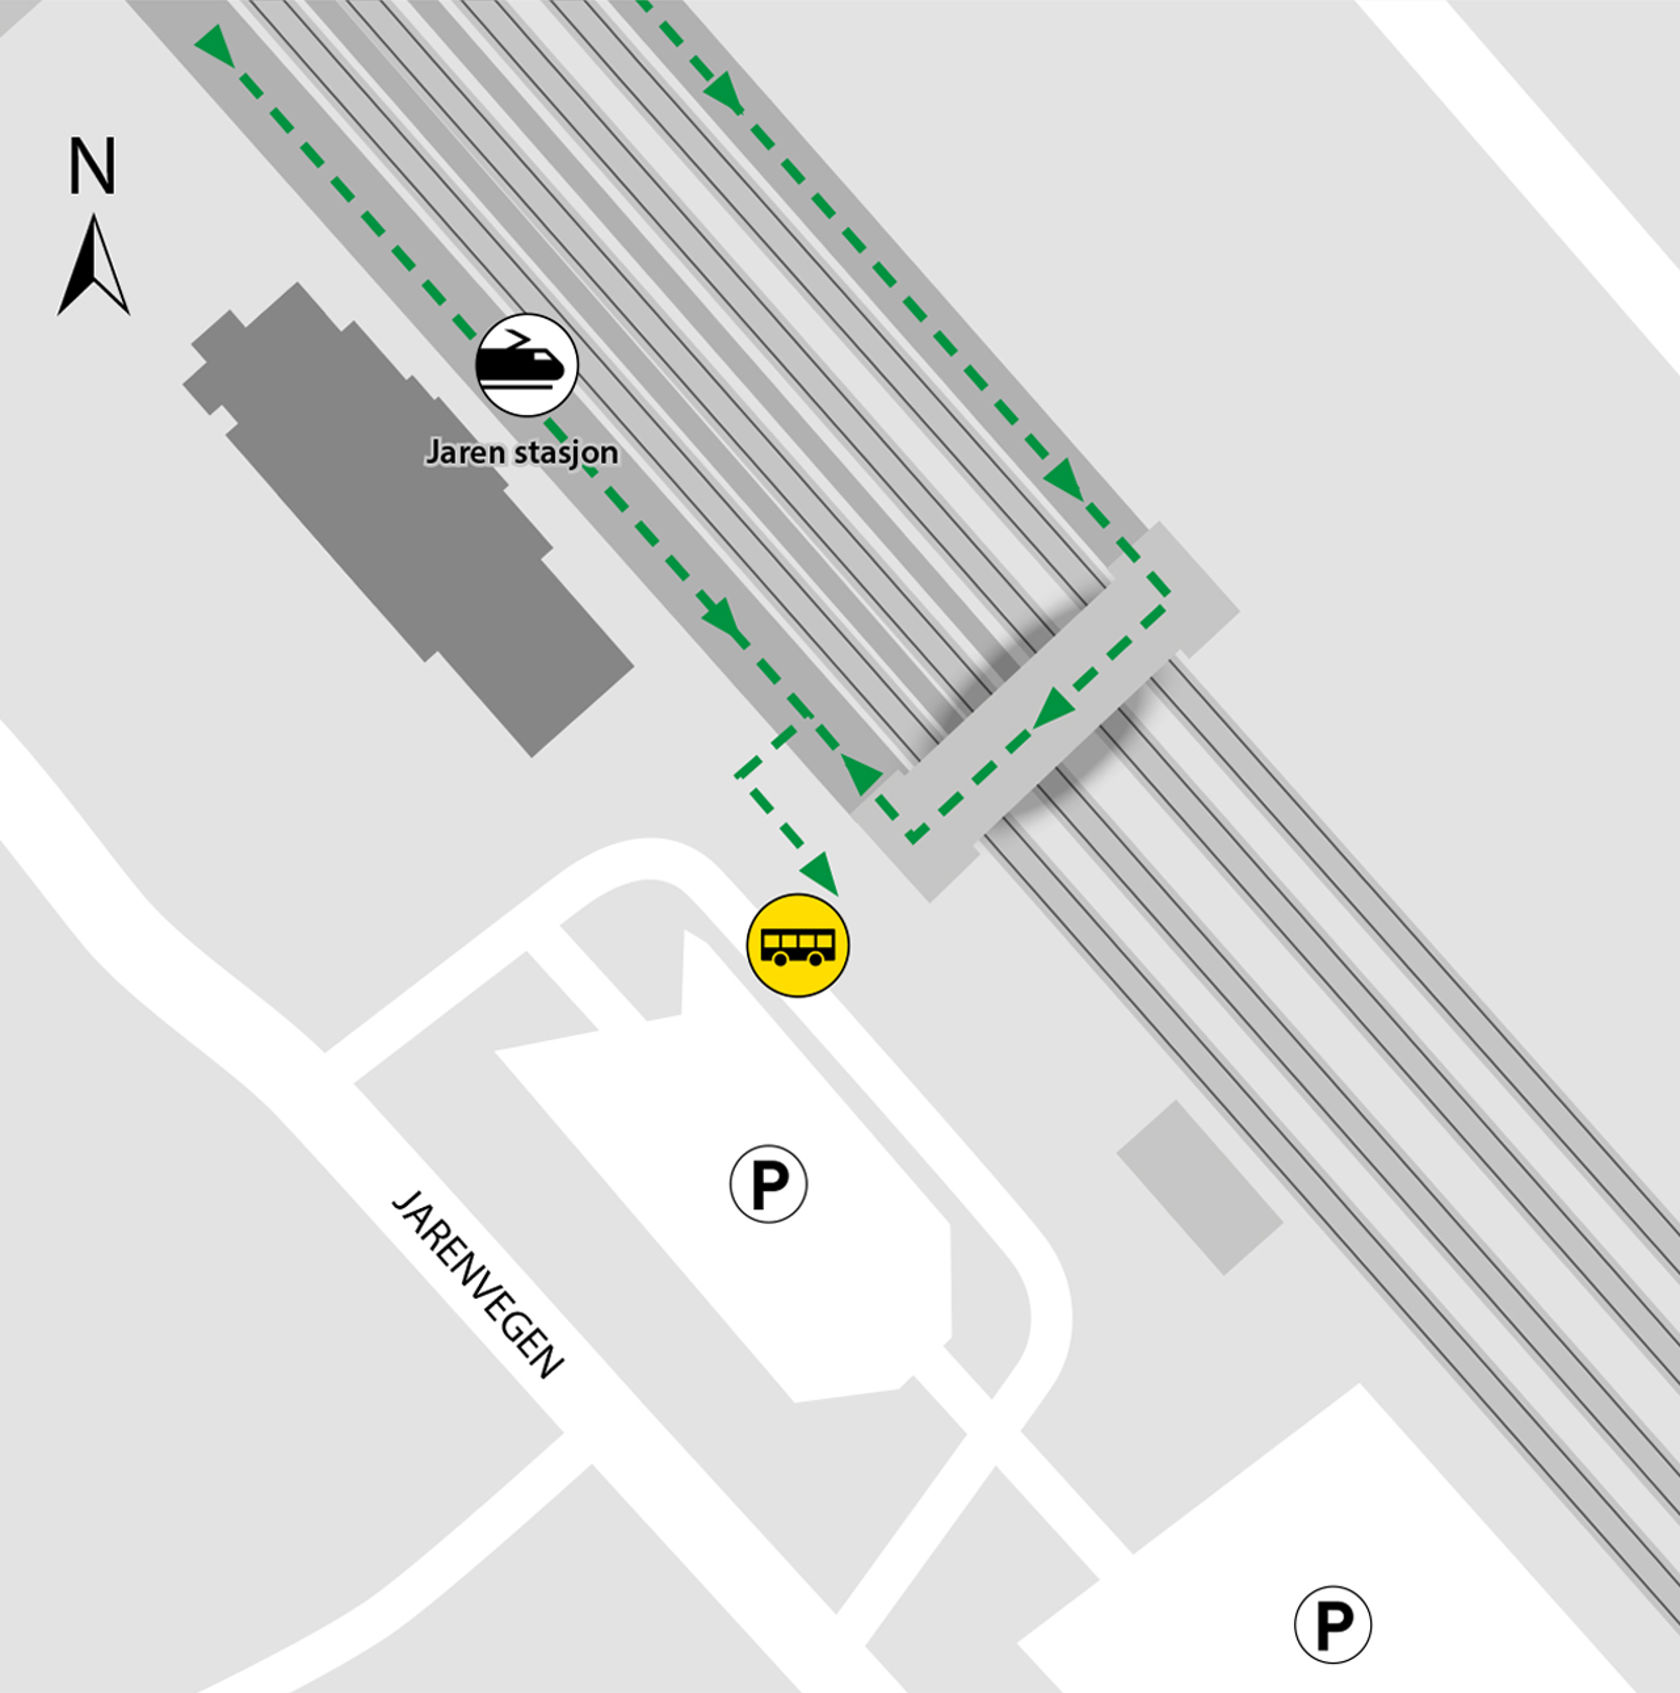 Map shows rail replacement service departs from bus stop Jaren station.